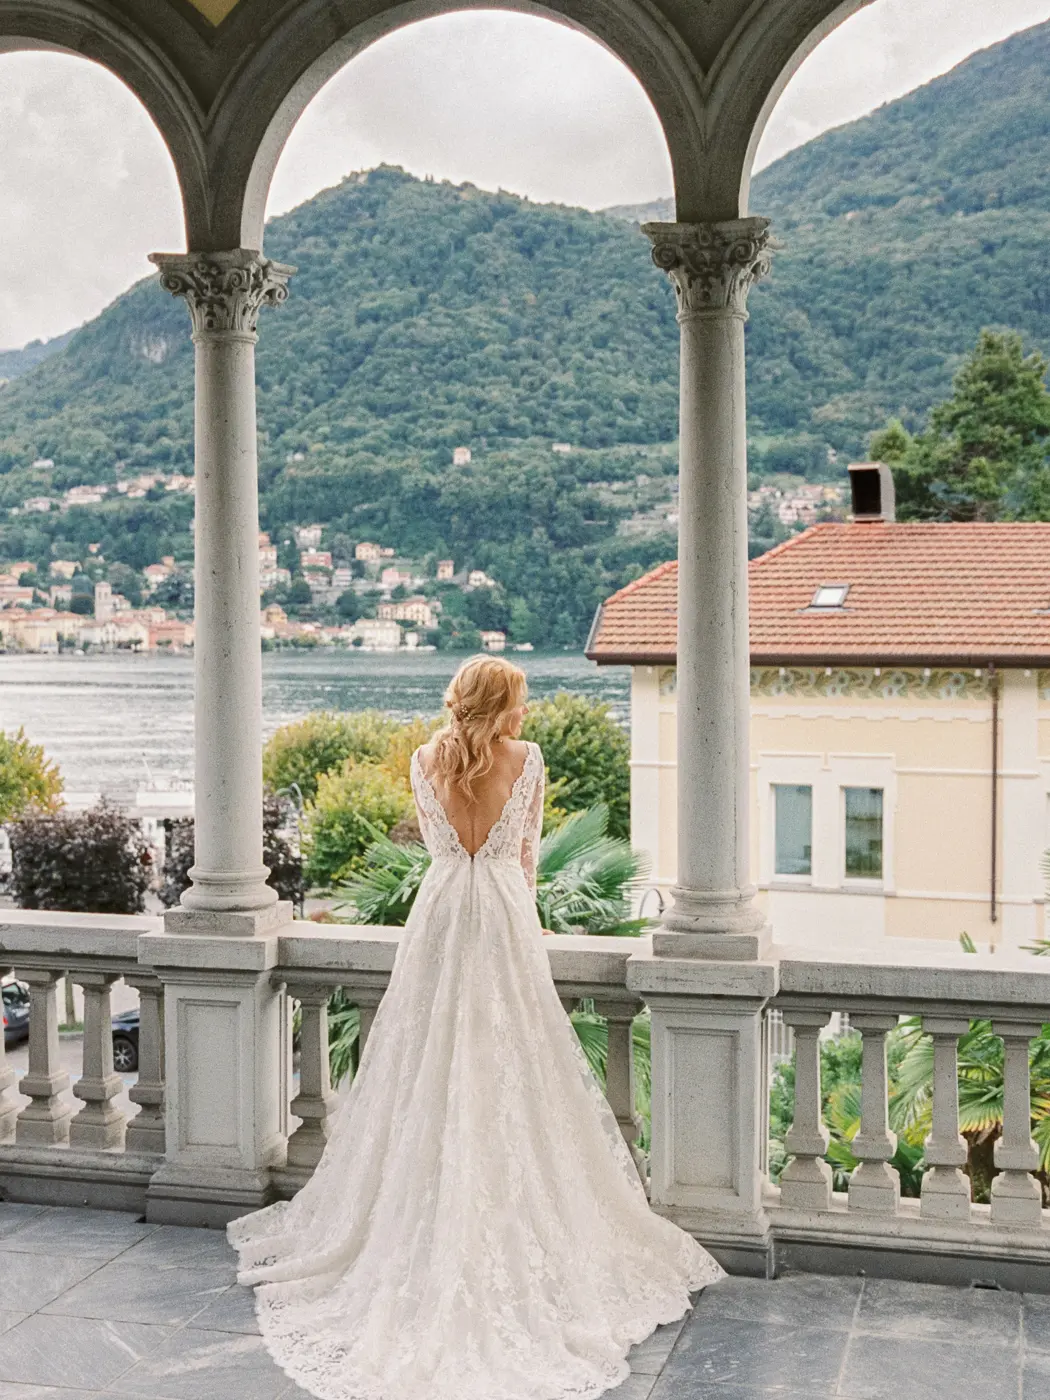 Behind-the-scenes elegance: The bride getting ready in a luxurious Lake Como villa, surrounded by natural light and breathtaking views